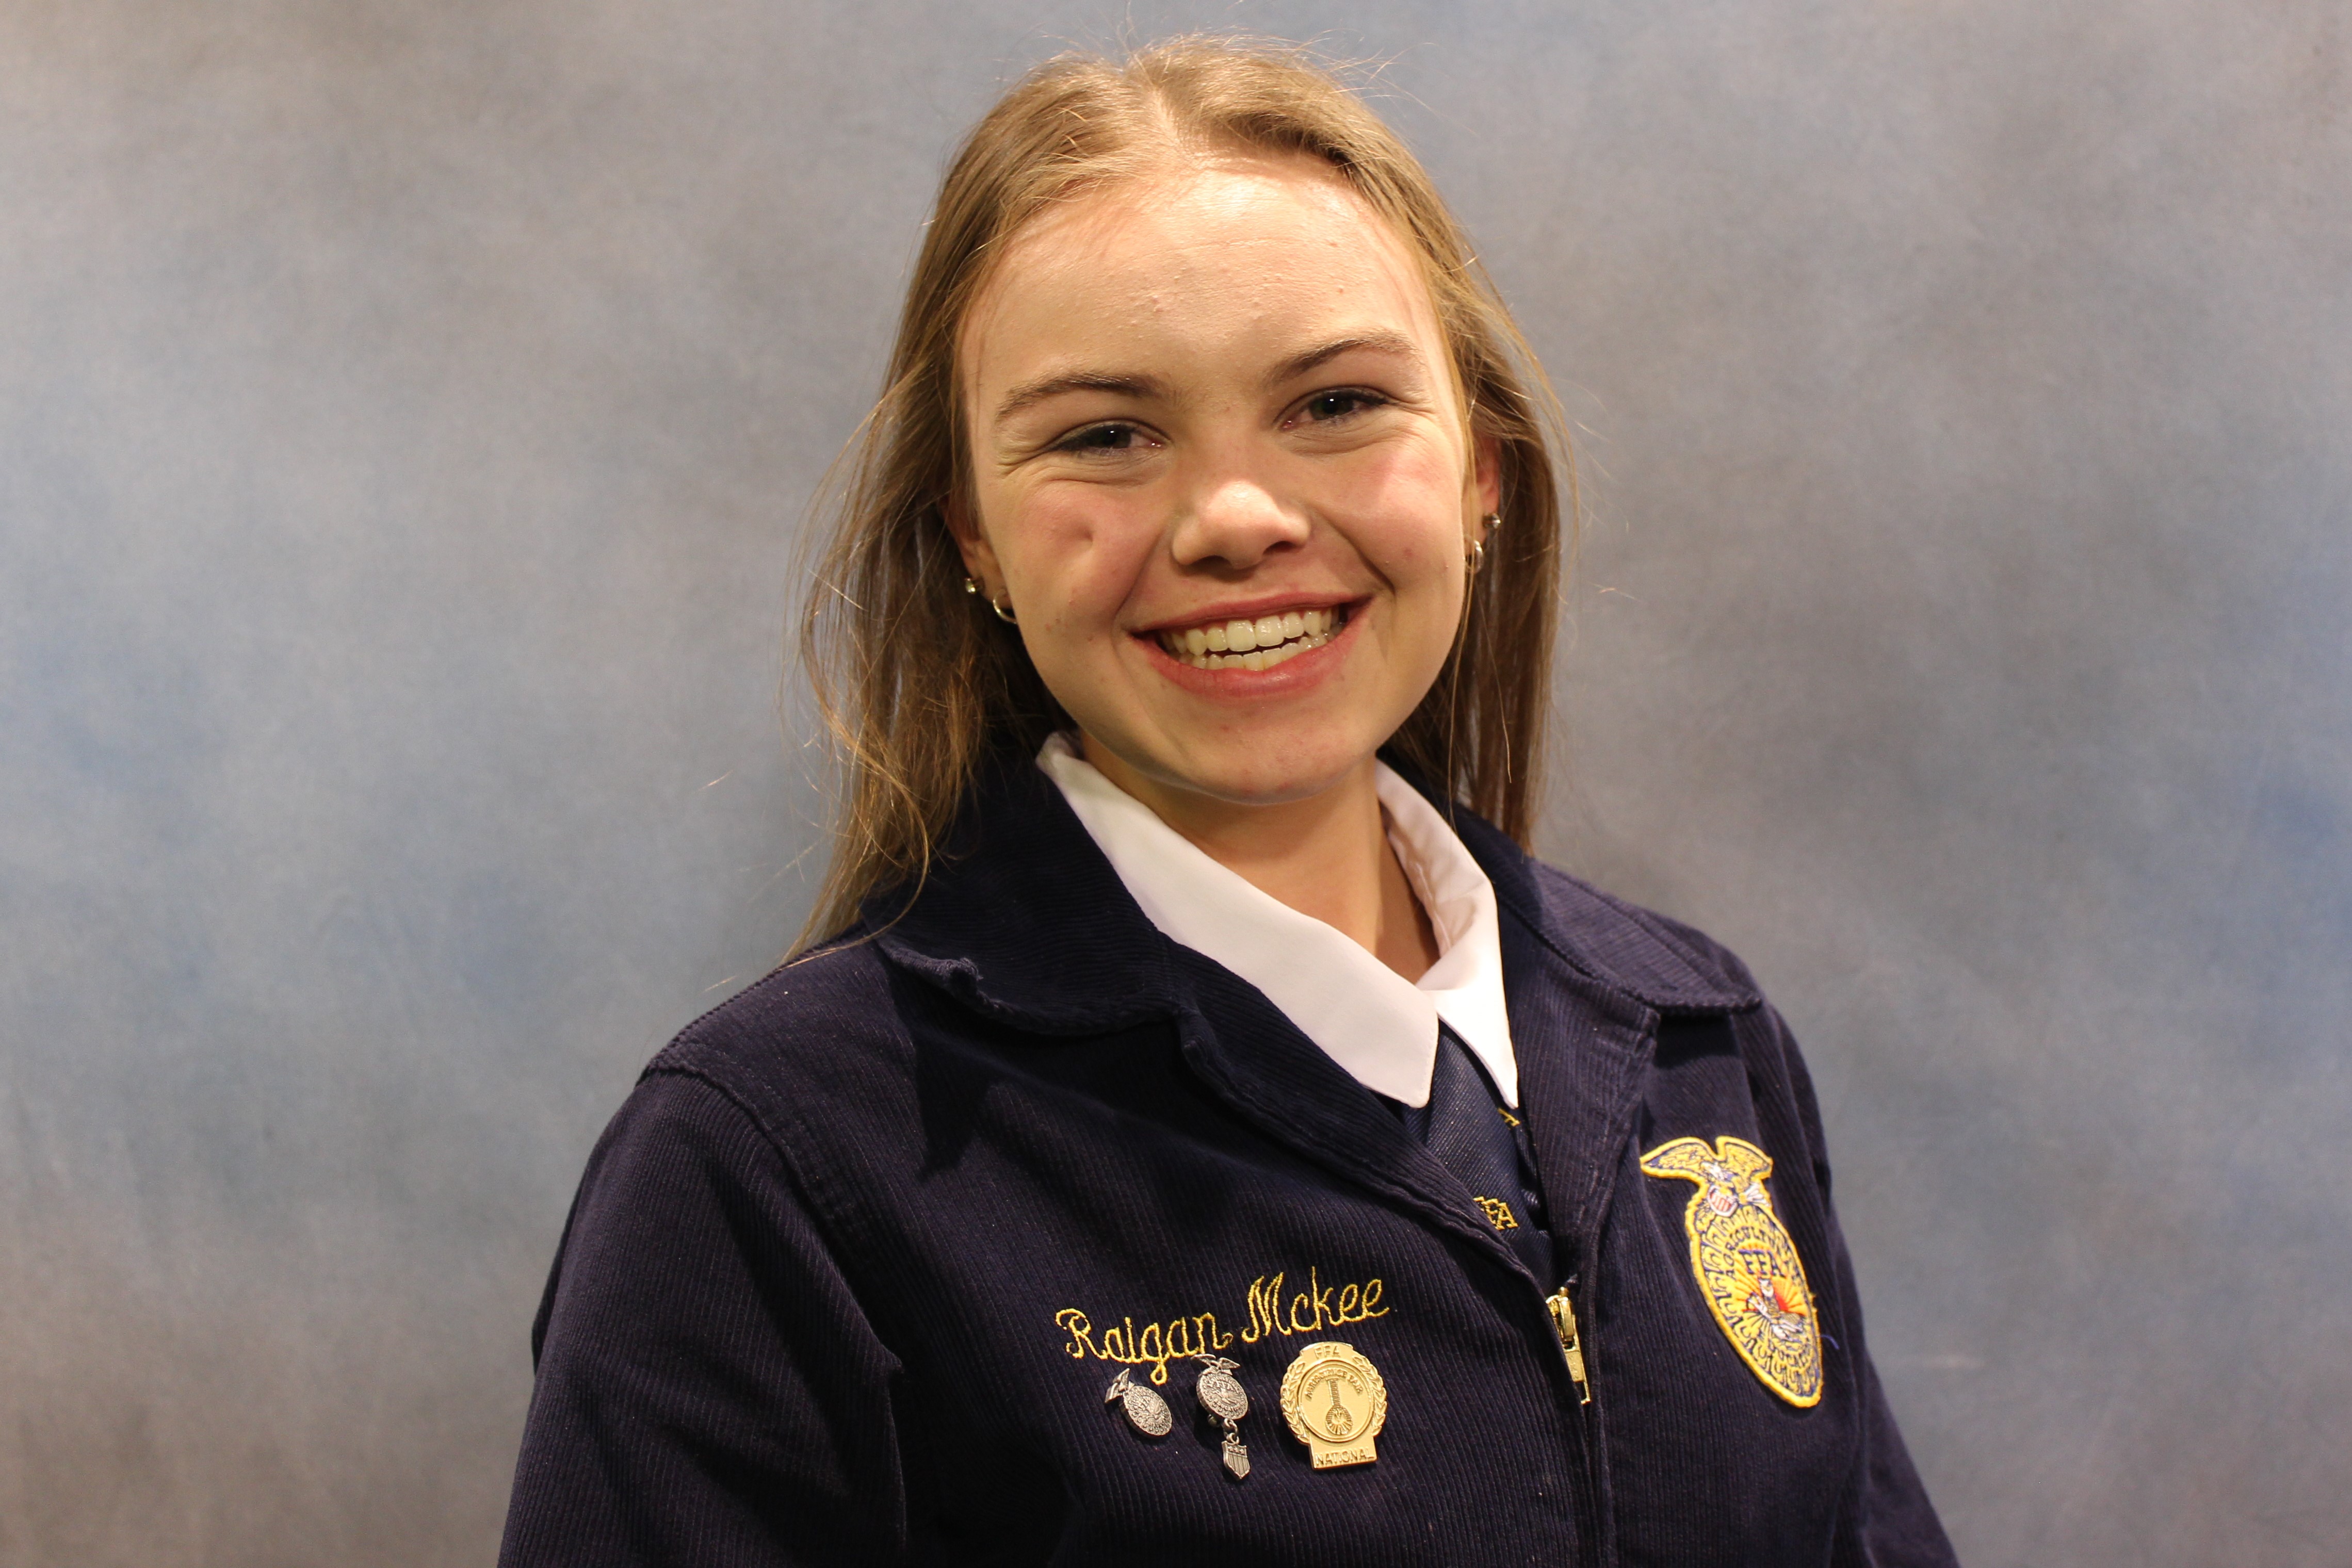 Introducing Raigan McKee of the Oolagah FFA Chapter, Your 2021 Northeast Area Star in Agriscience